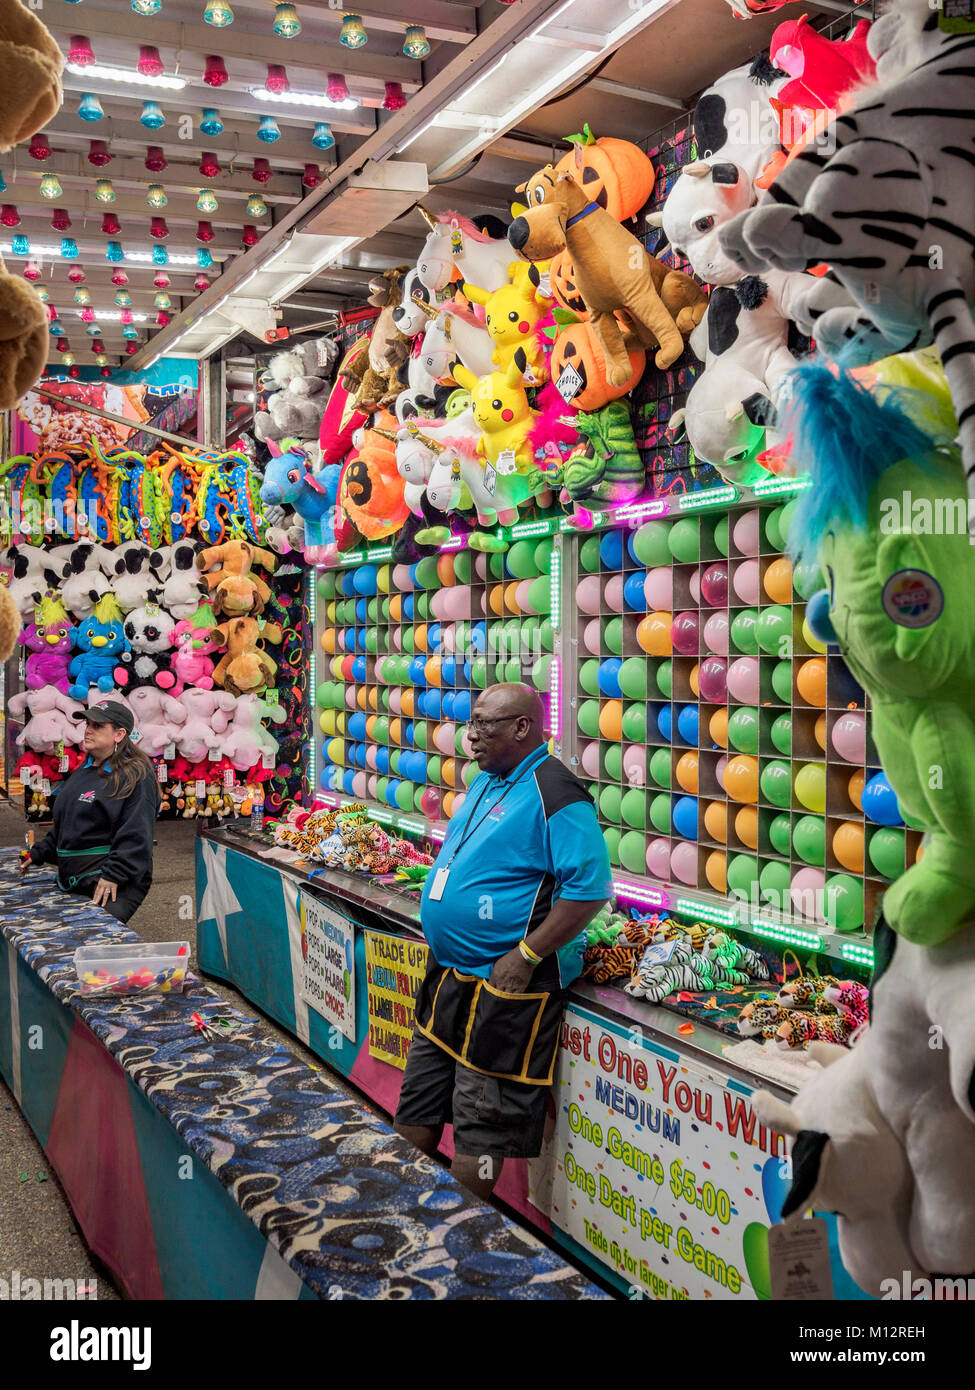 Carnival booth workers one male one female in a dart throwing carnival game with colorful balloons, cupie dolls and stuffed animals for prizes. Stock Photo